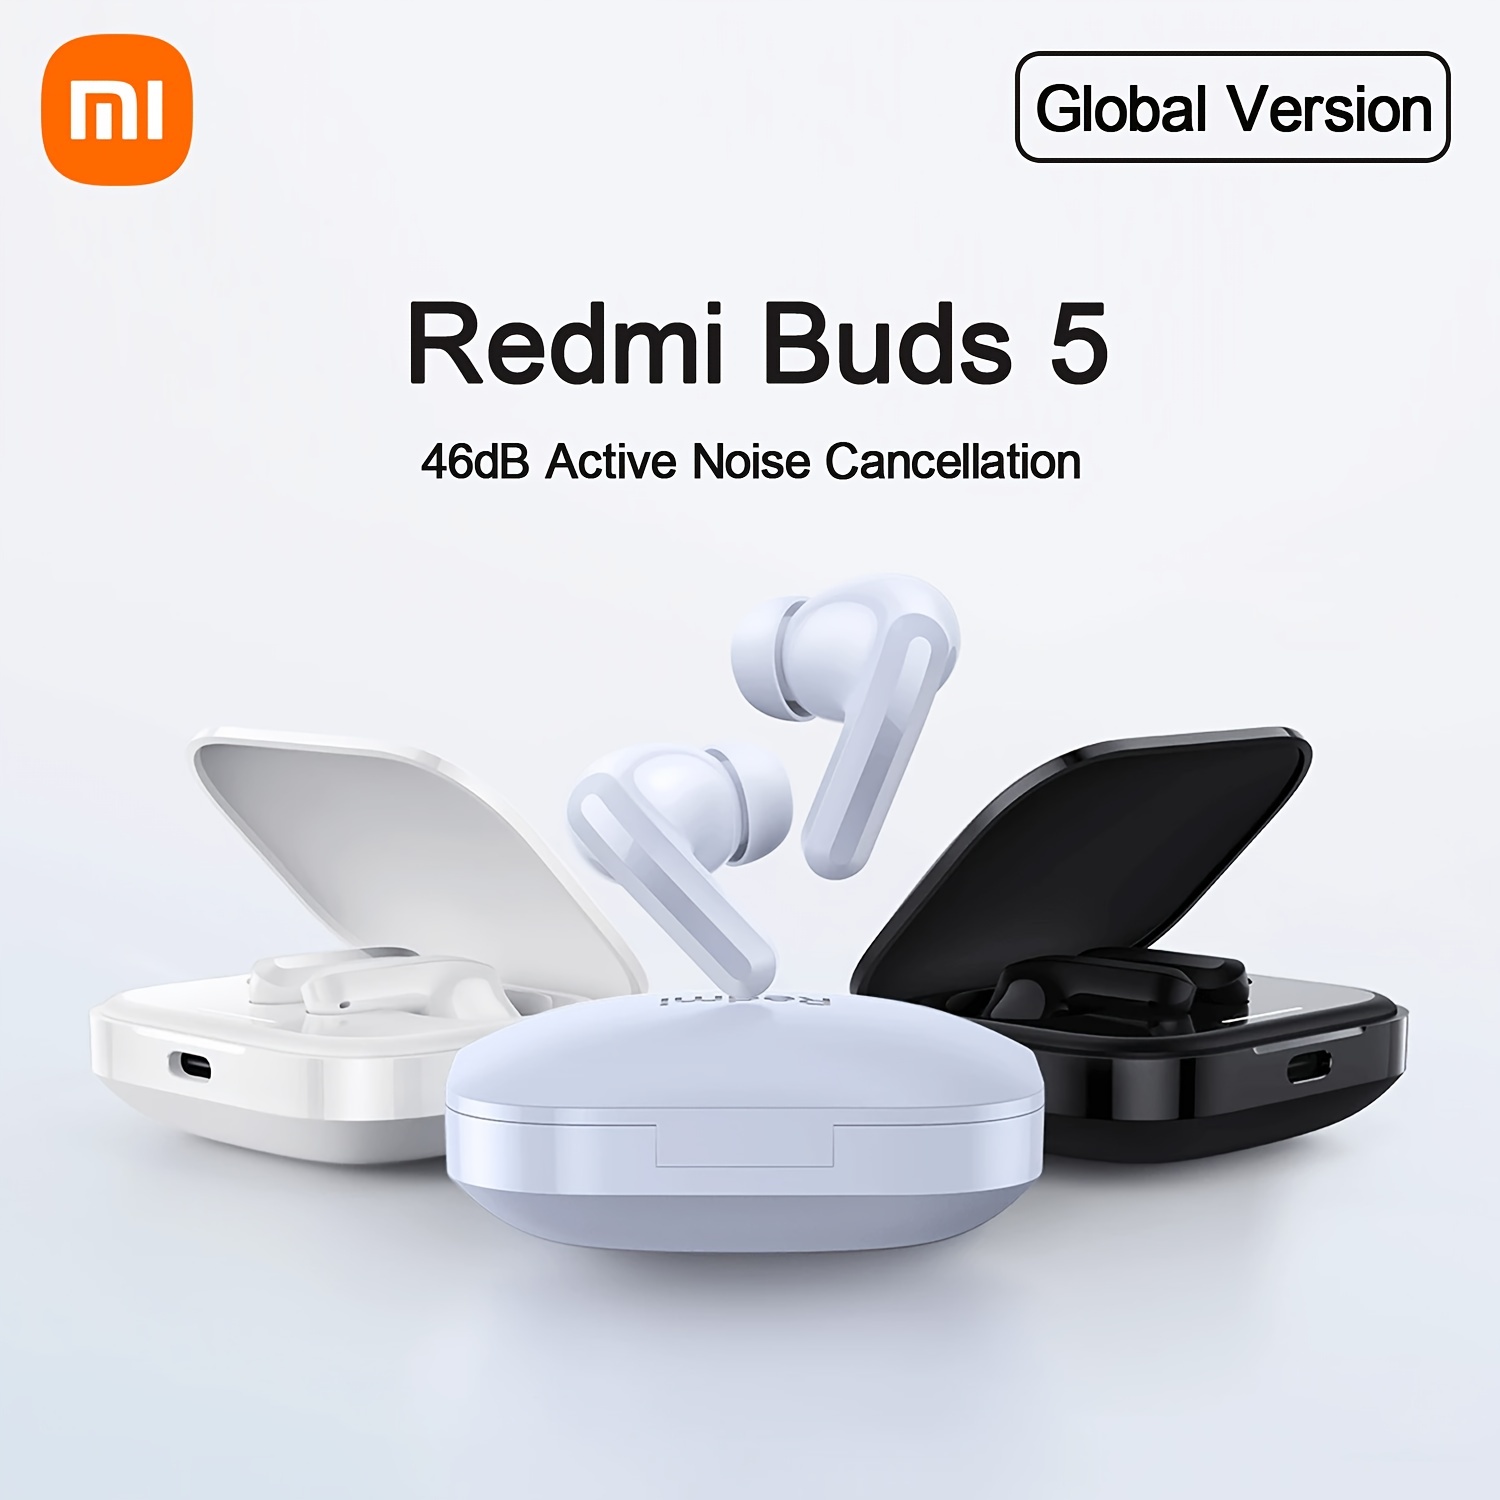 

Xiaomi Redmi Buds 5 , 46db Active Noise Cancellation, 12.4mm High-polymer Titanium-plated Diaphragm, 40h Long Battery Life.